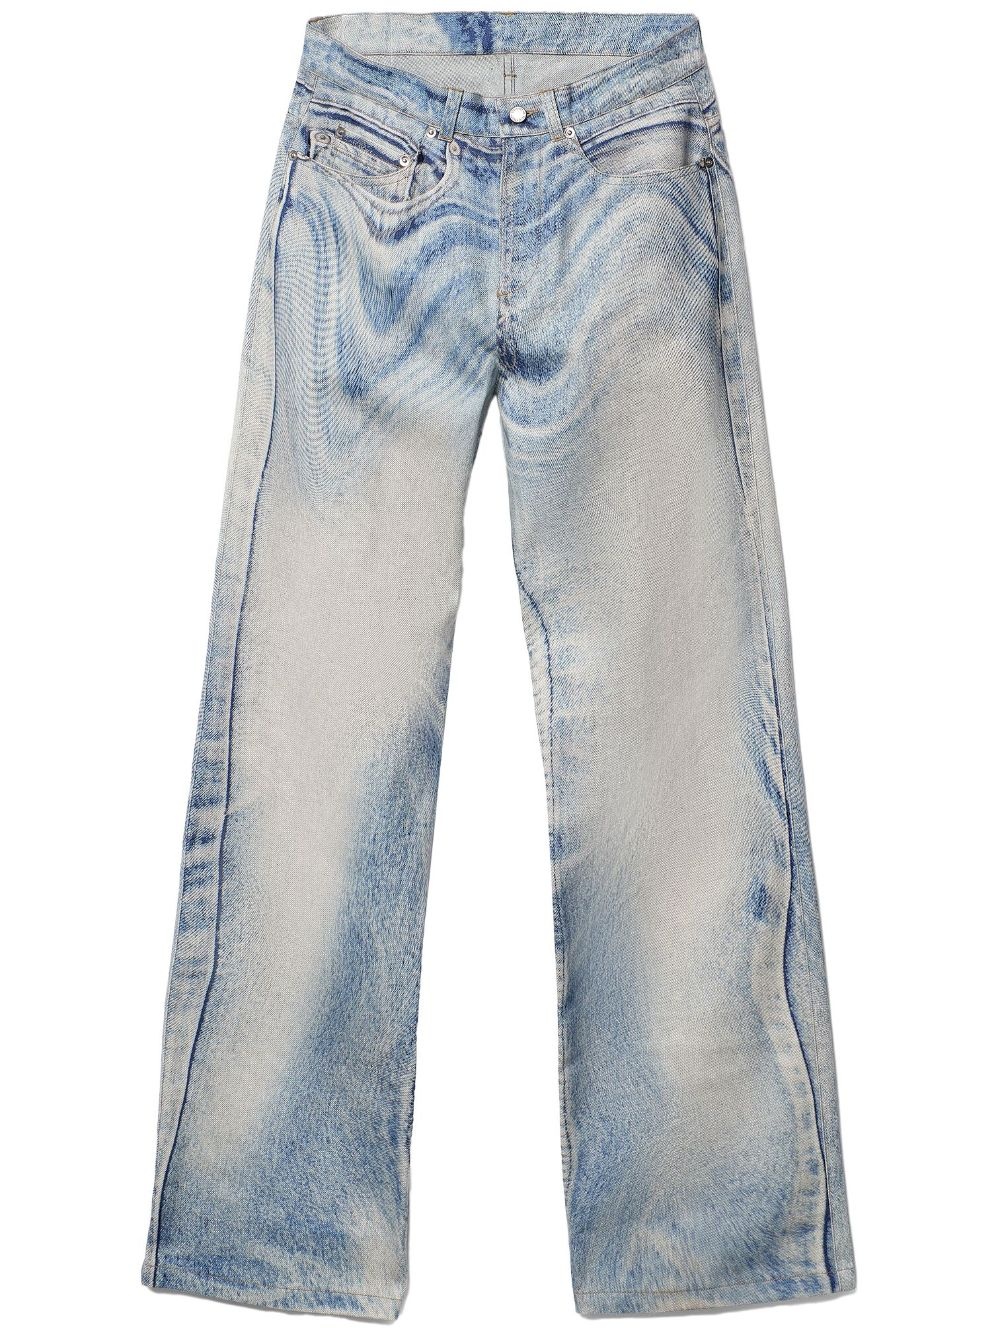 abstract-pattern jeans - 1